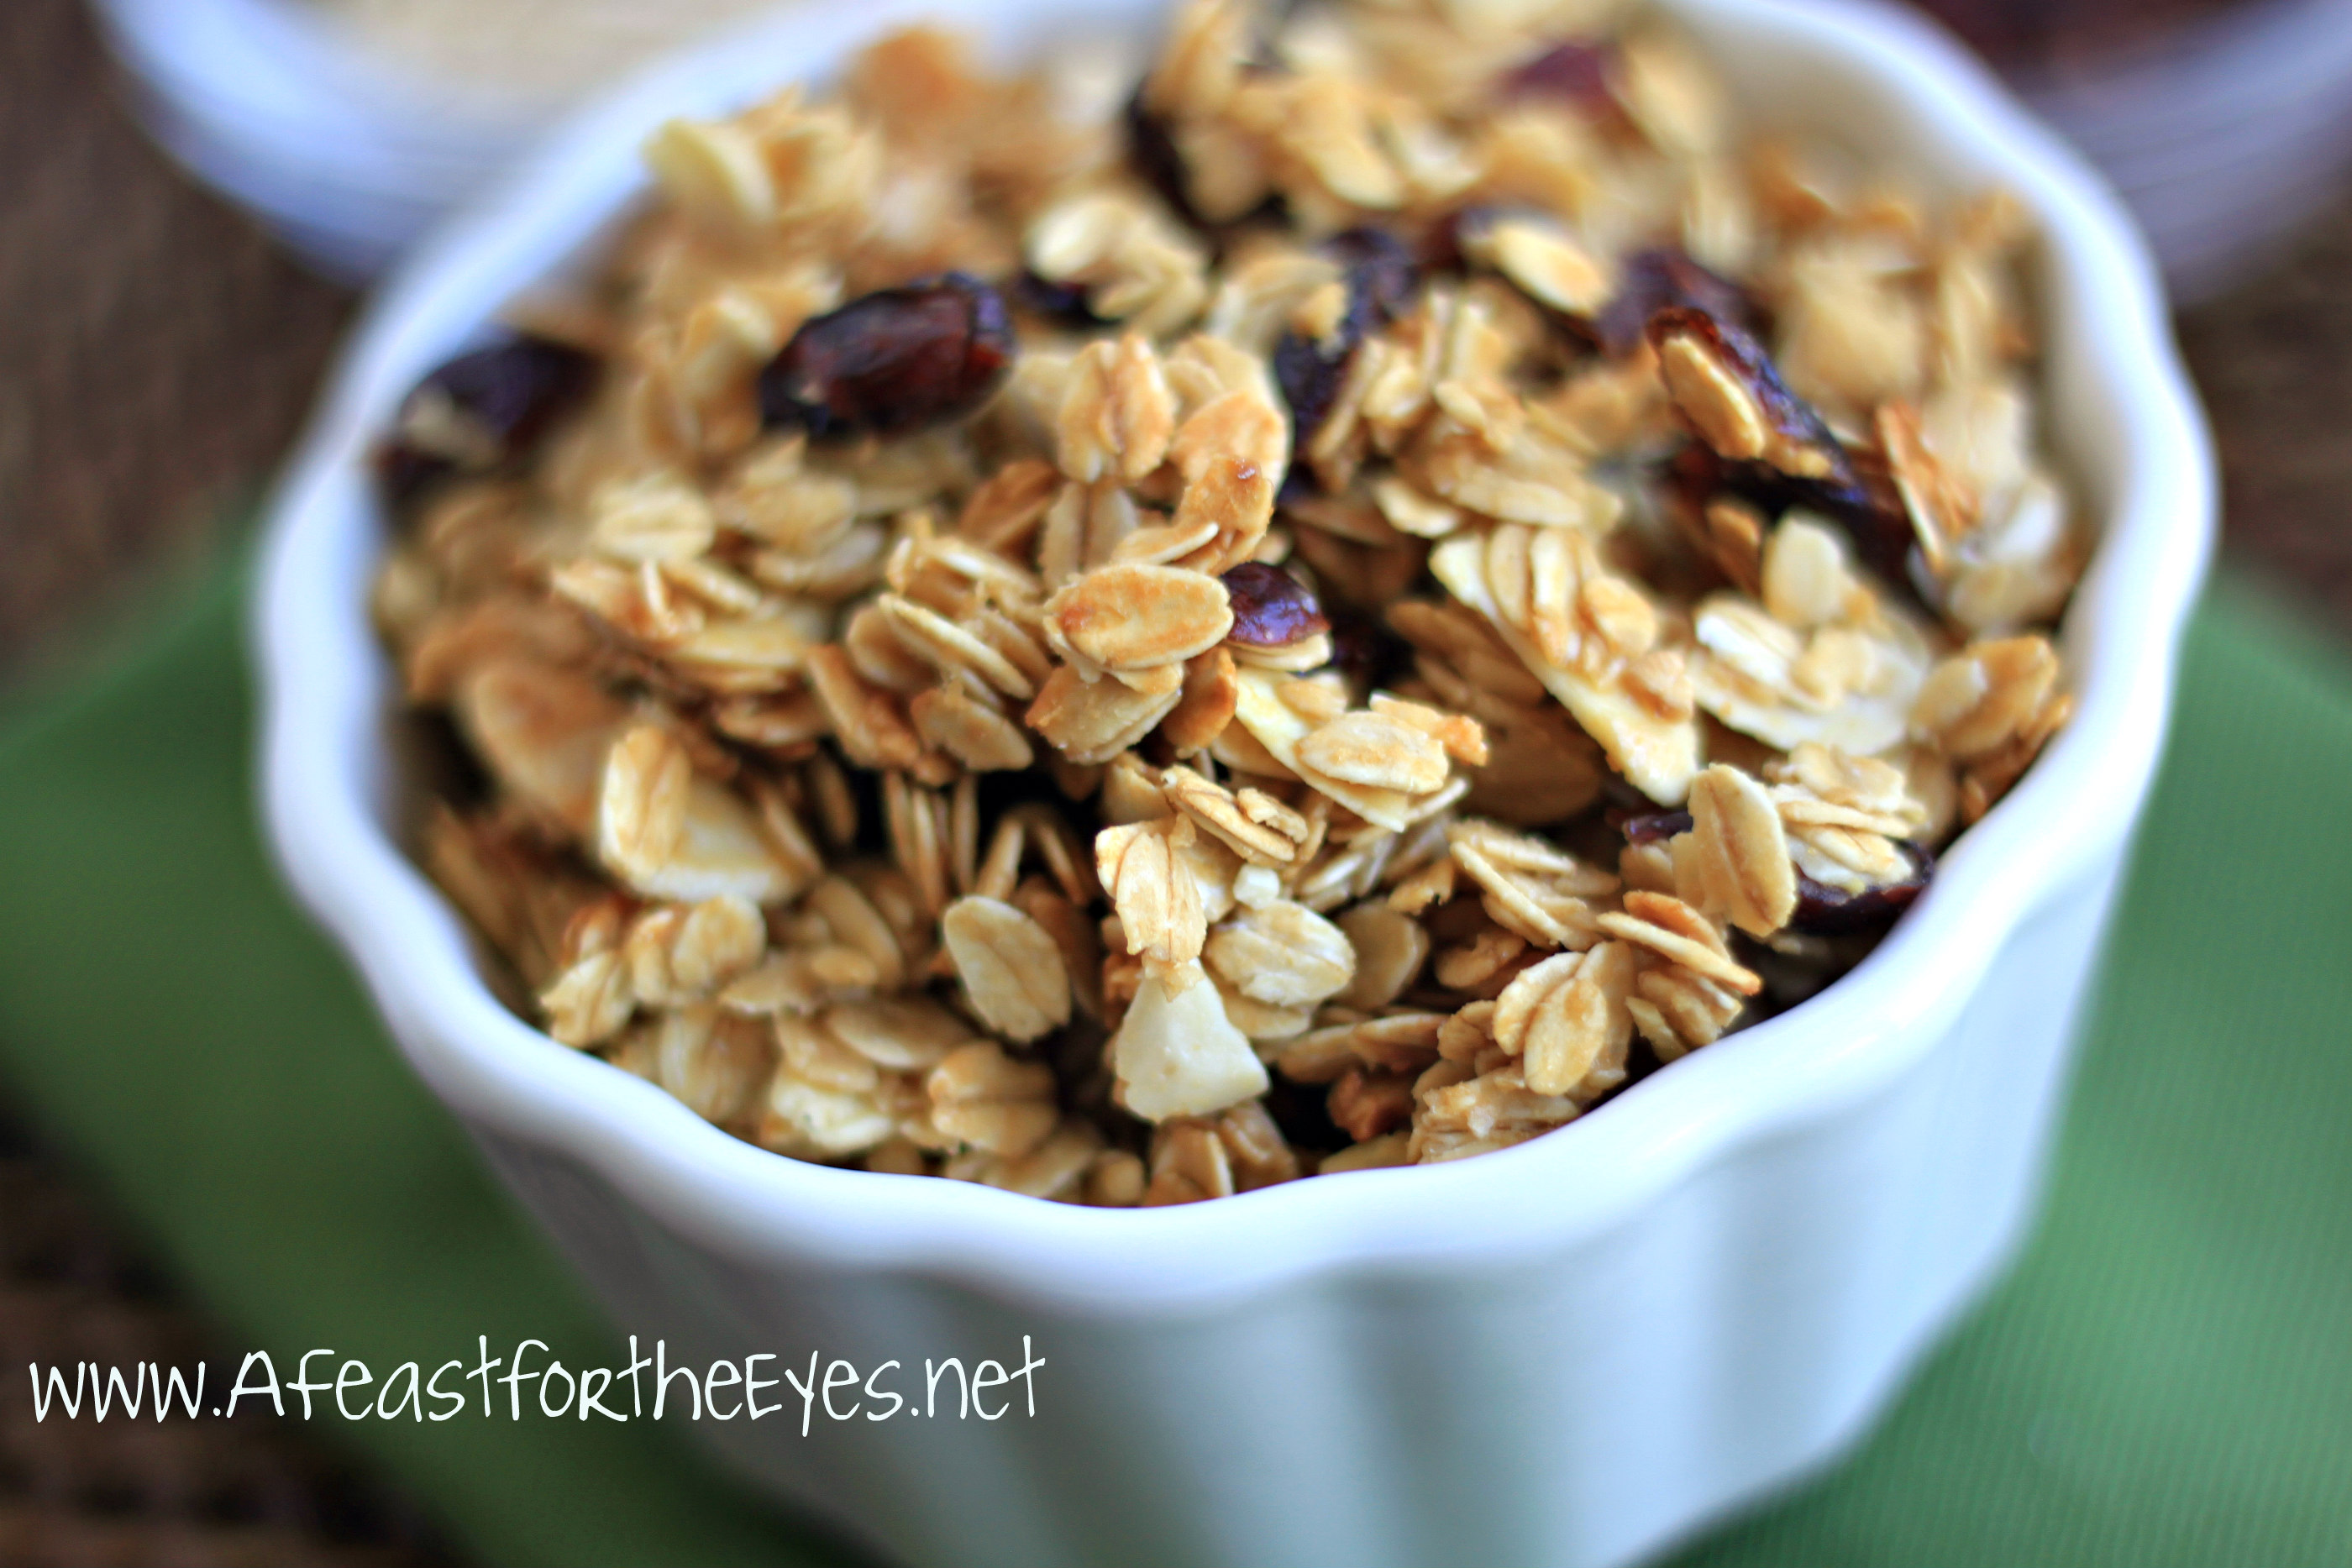 Homemade granola is easy to make, and you can customize it just to your liking. This is a recipe I've been making for years, and it's a healthier version made with honey and a little brown sugar. Mix this with a bowl of low-fat yogurt, and you have a satisfying and delicious power snack!